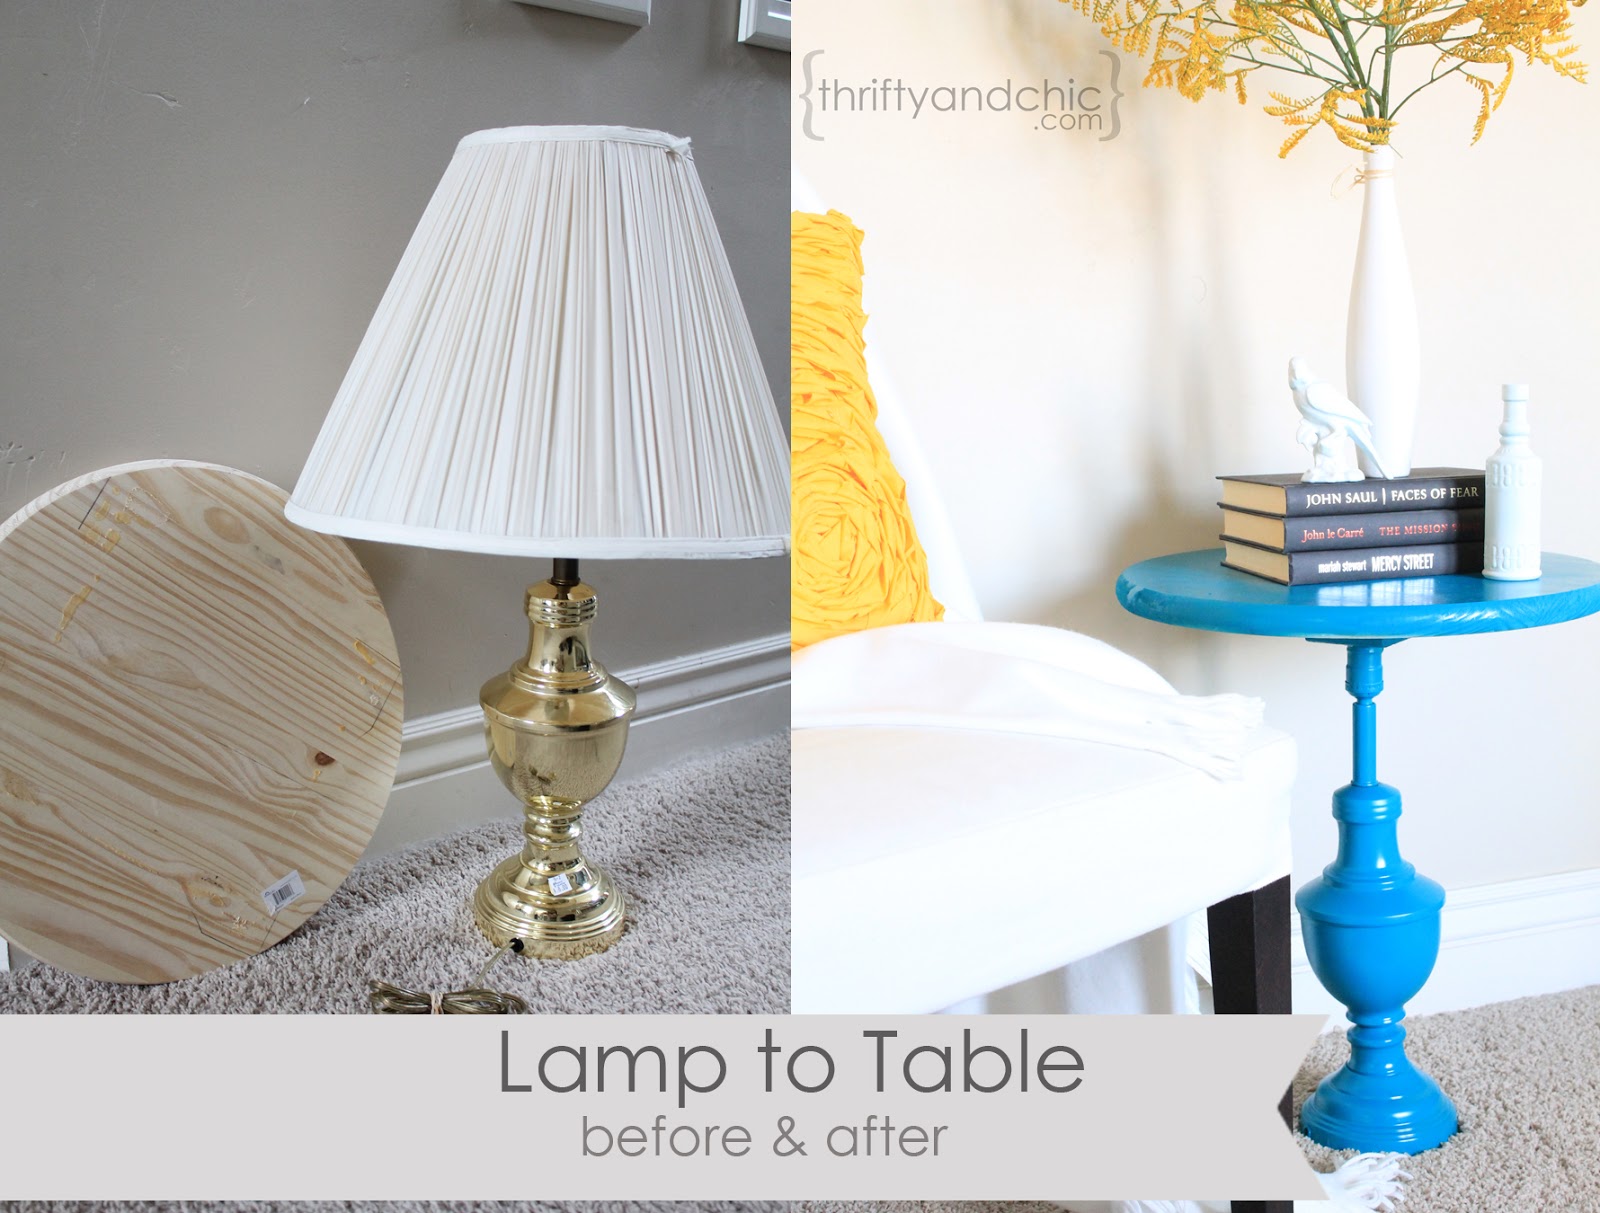 Diy Projects And Home Decor, How To Turn A Table Lamp Into Hanging